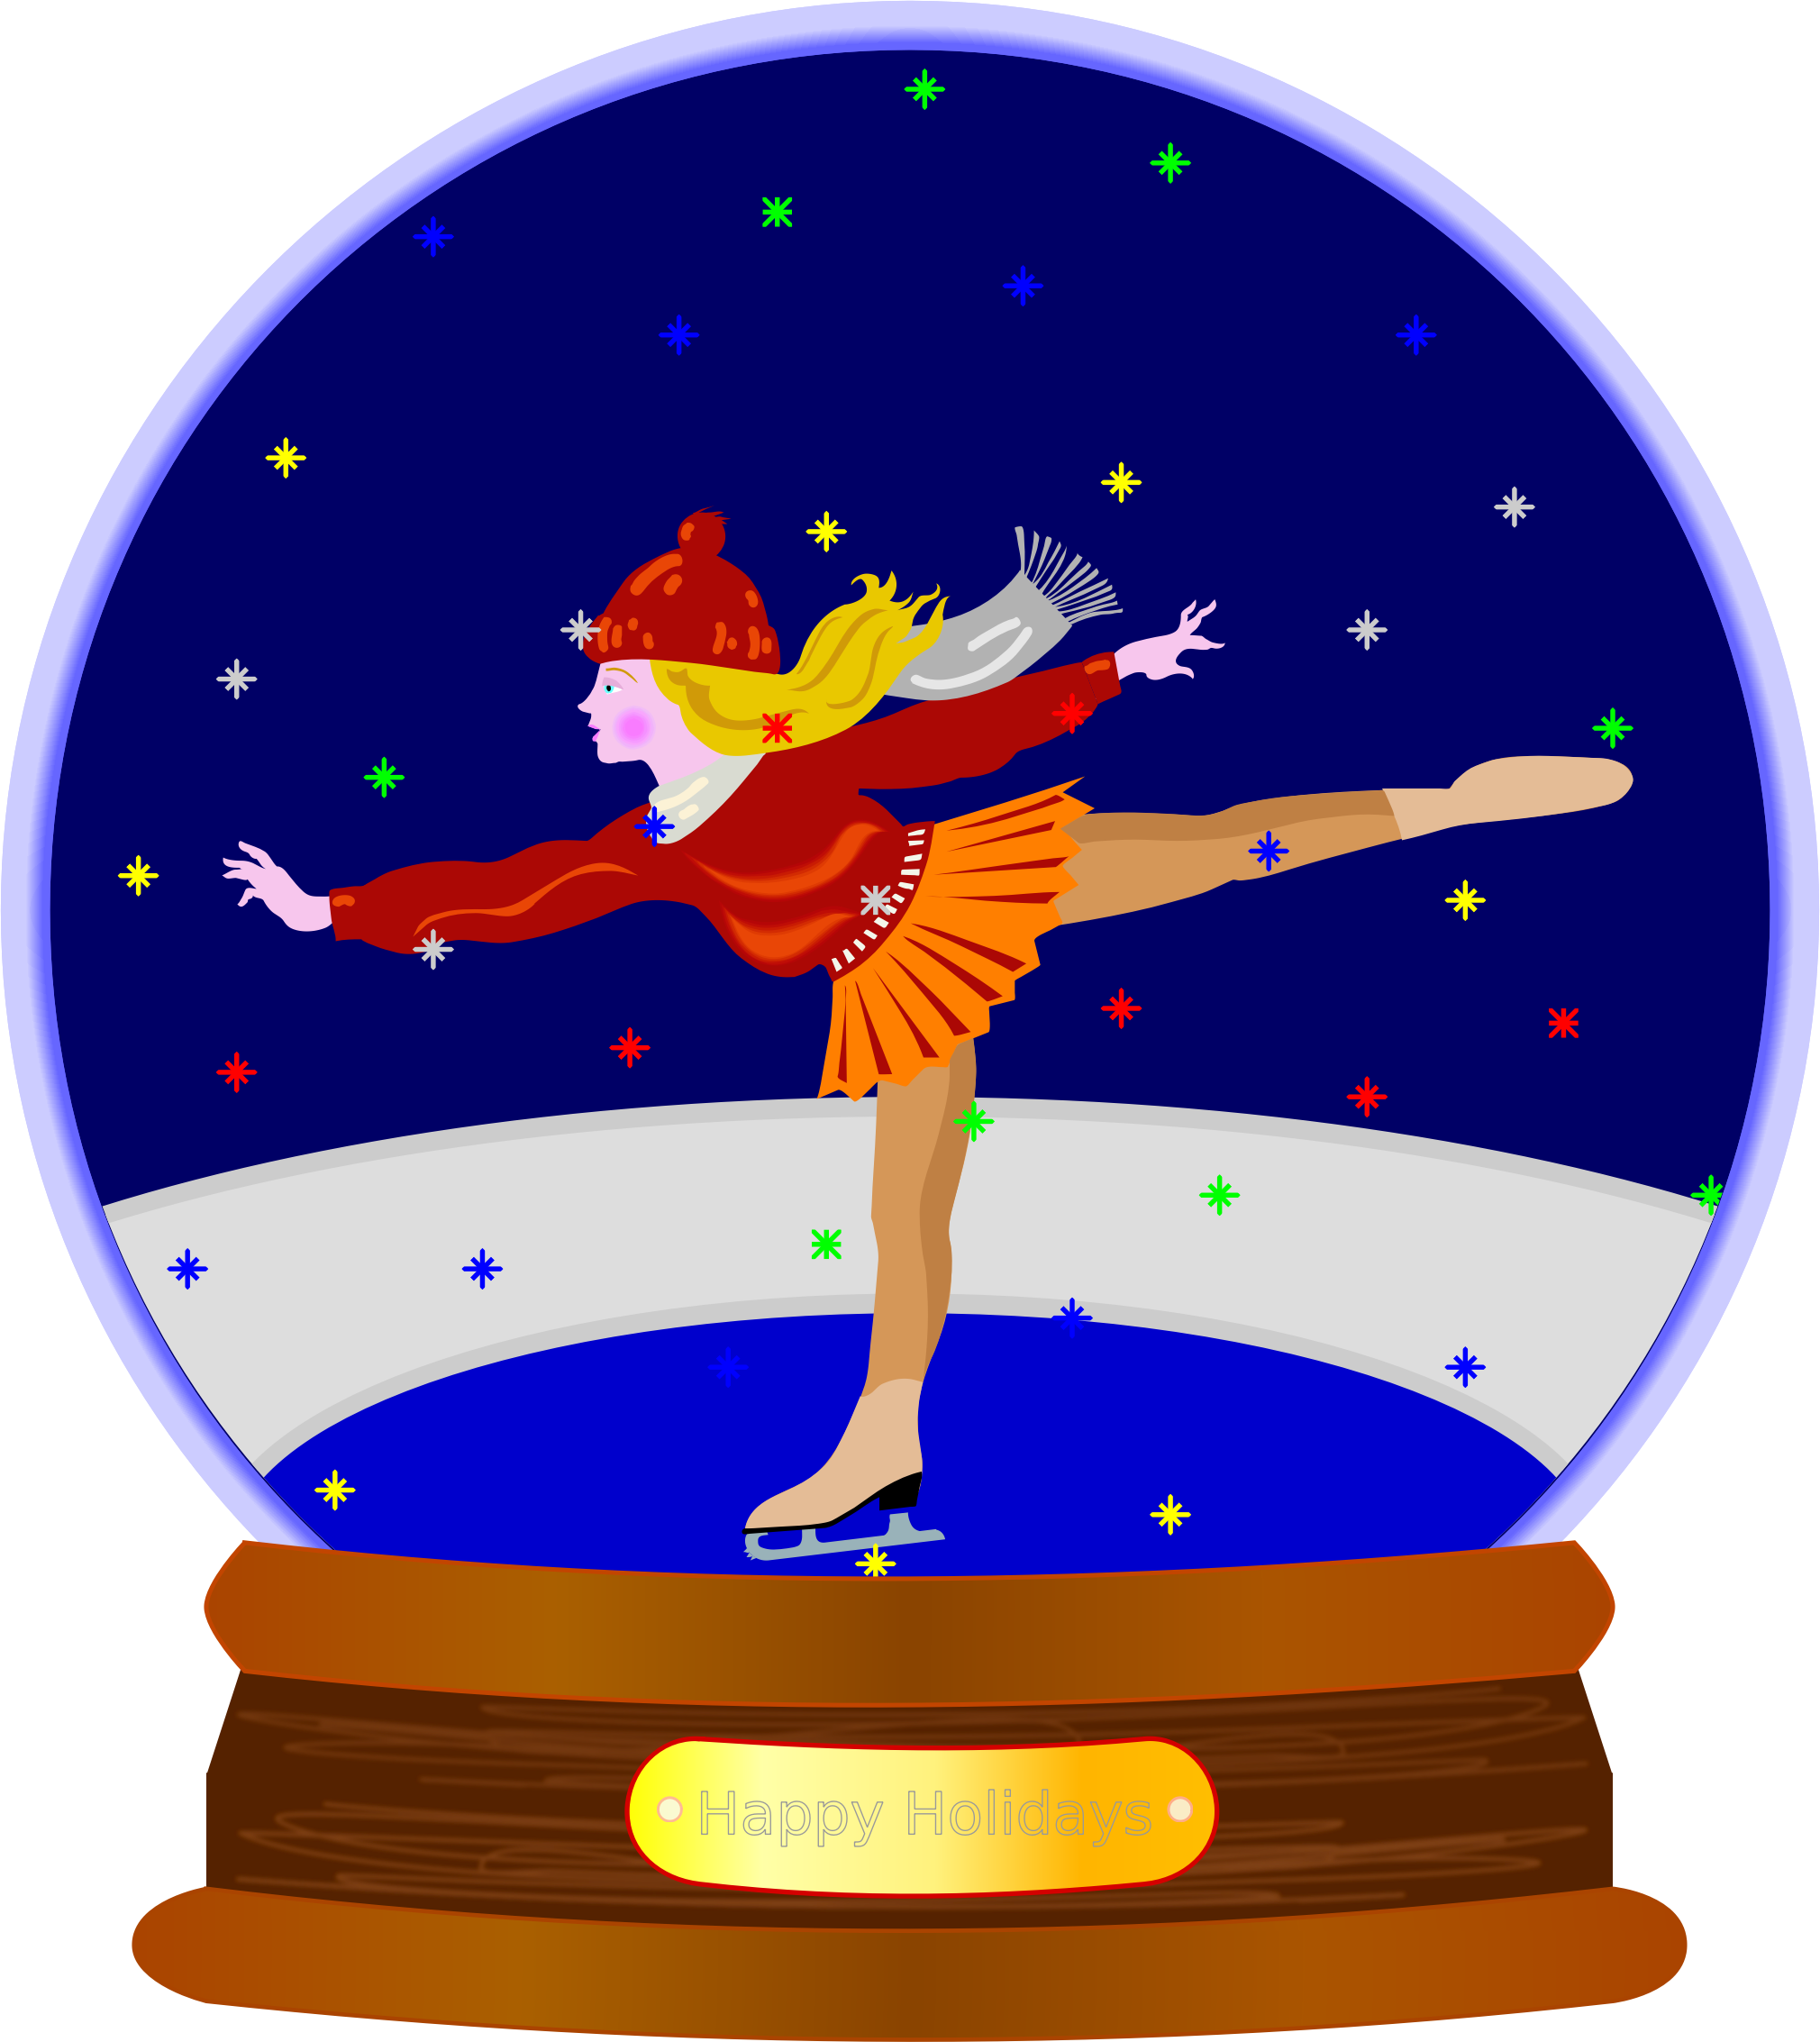 Colored snow globe big. Holidays clipart animated